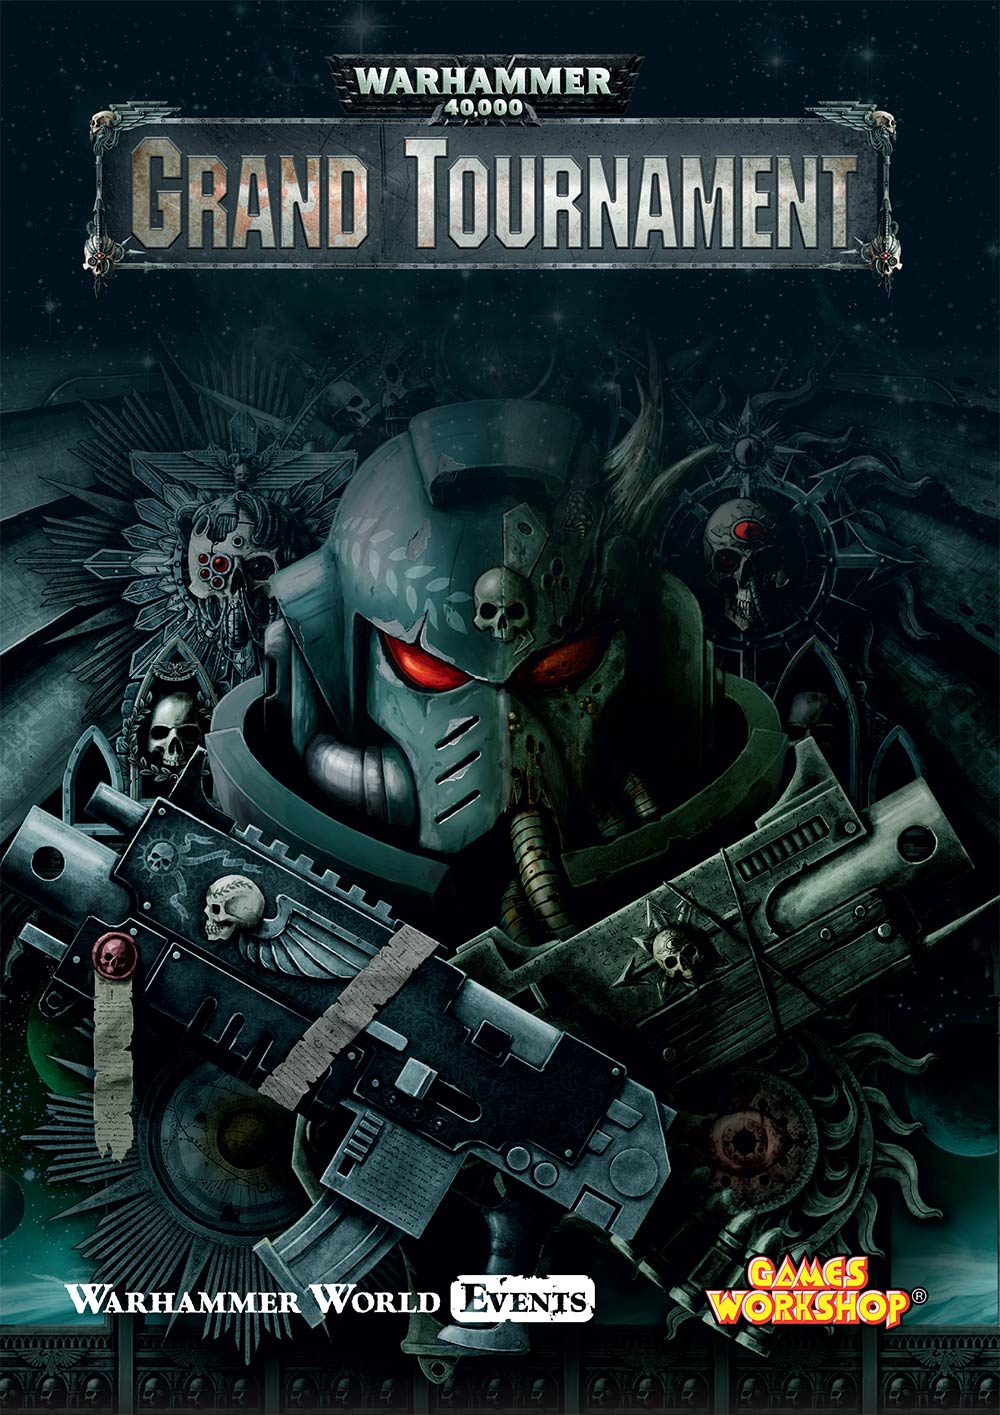 Warhammer 40,000 Grand Tournament Events Pack Now Available